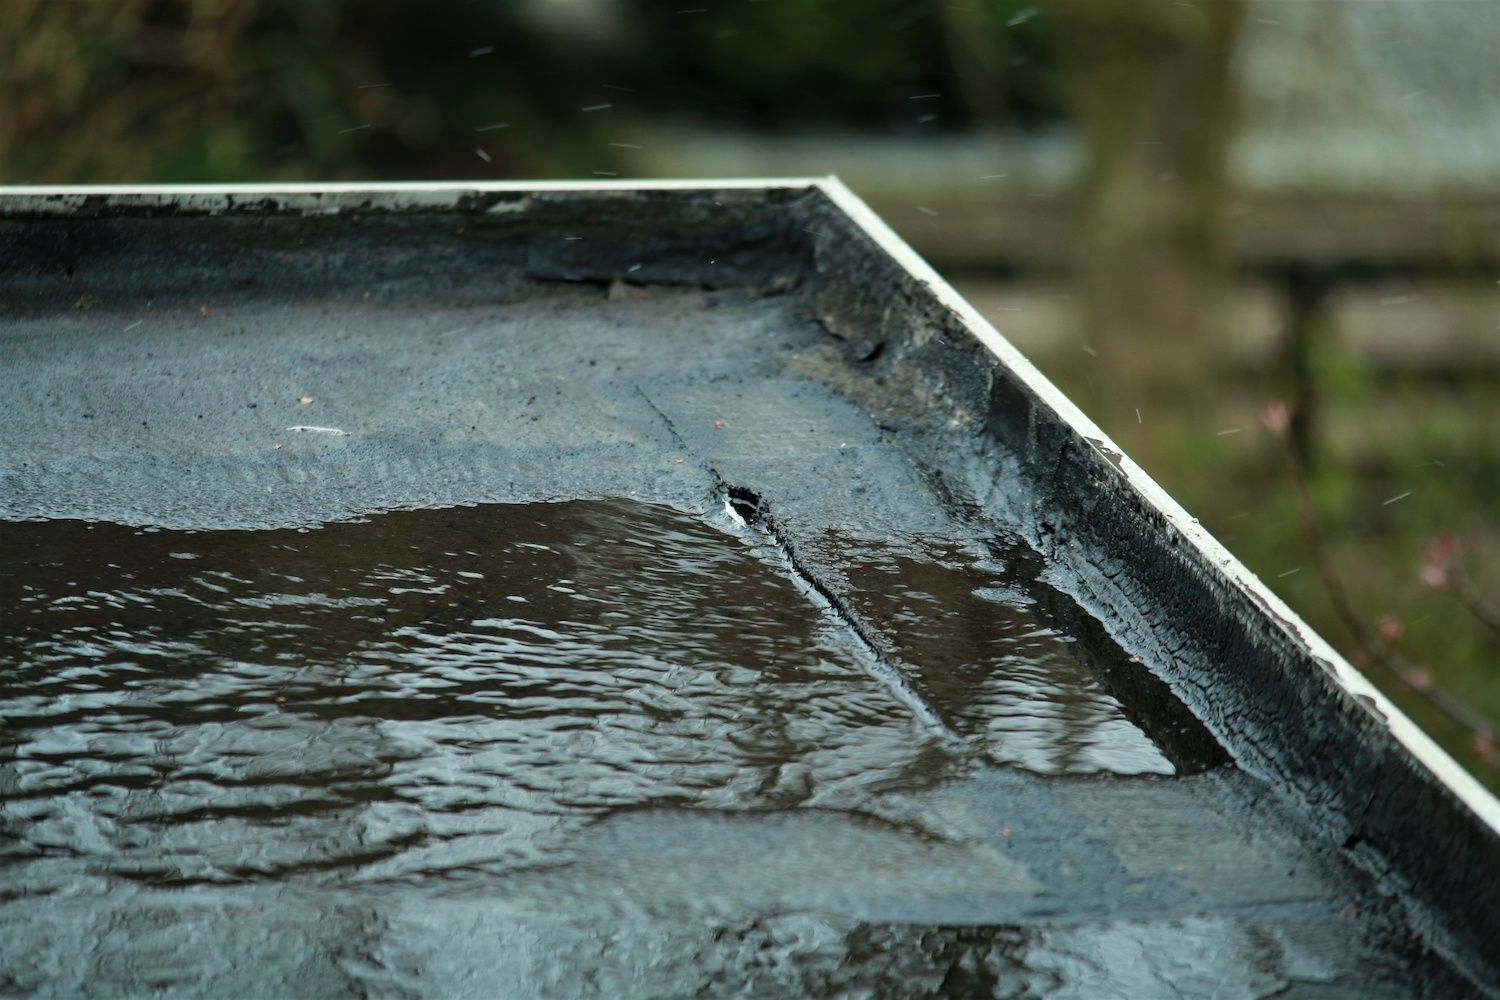 A close up of a roof with water coming out of it.